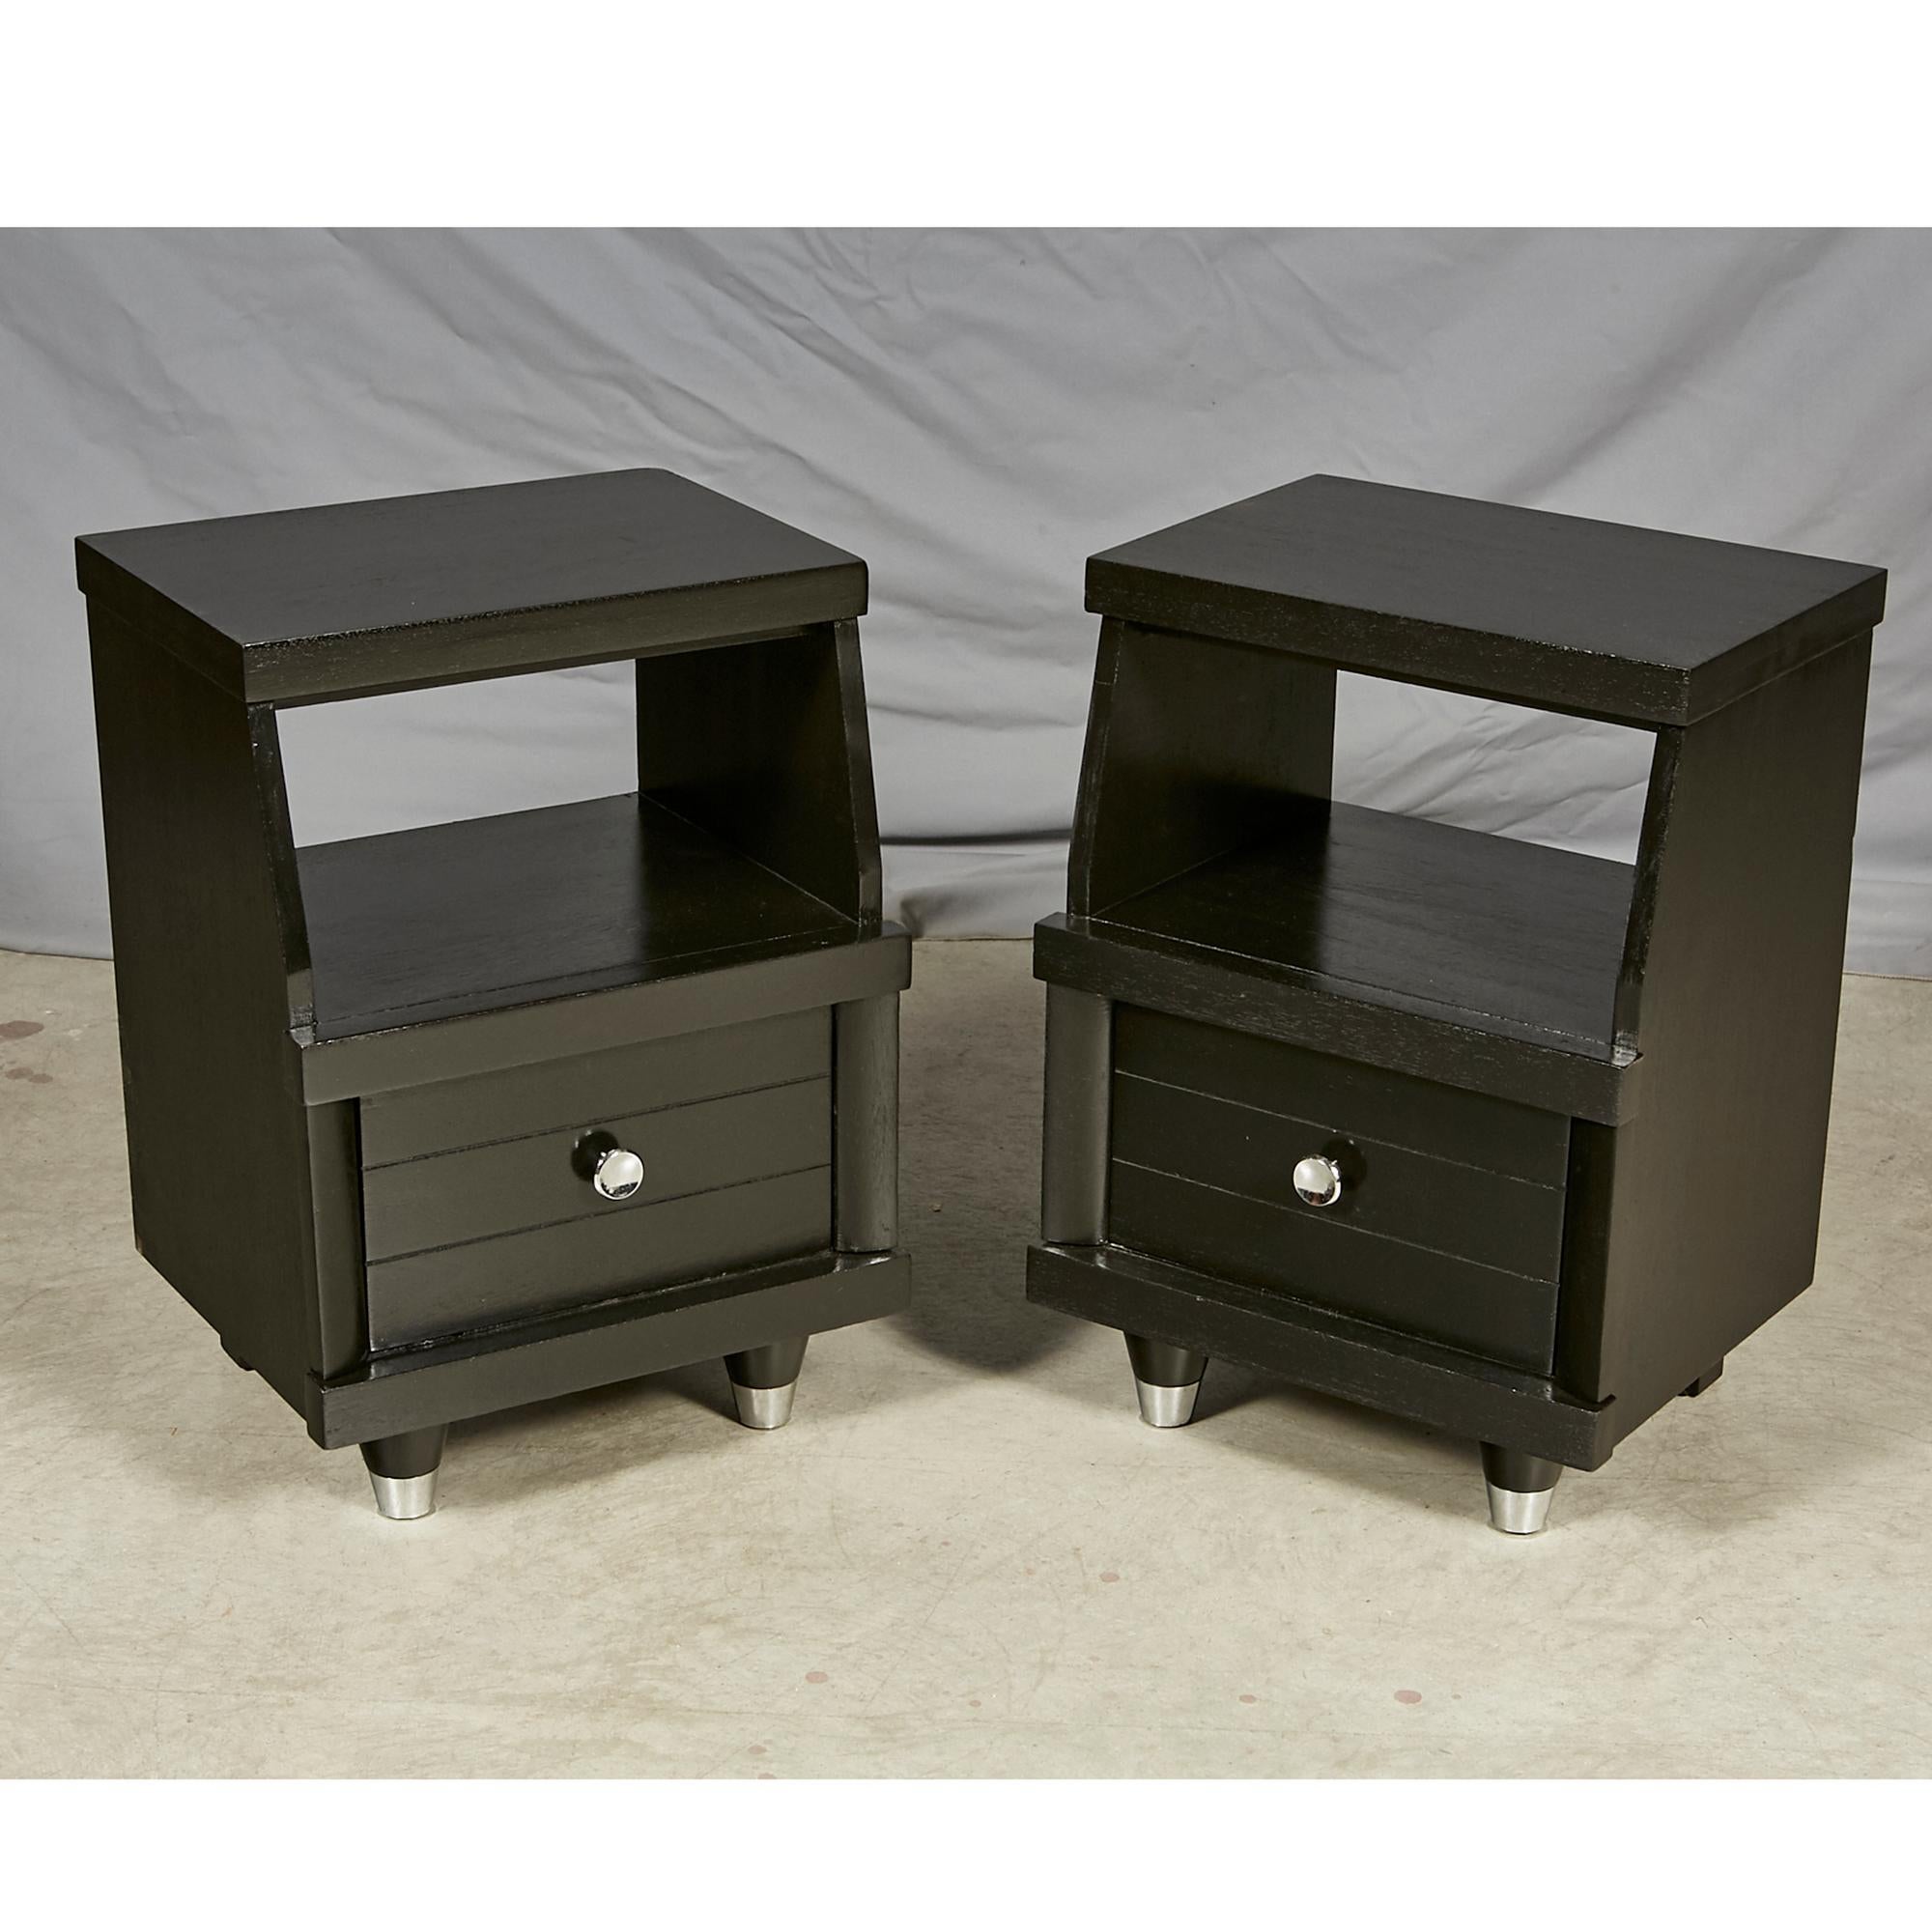 Mid-20th Century Modern Black Lacquered Nightstands, Pair In Excellent Condition For Sale In Amherst, NH